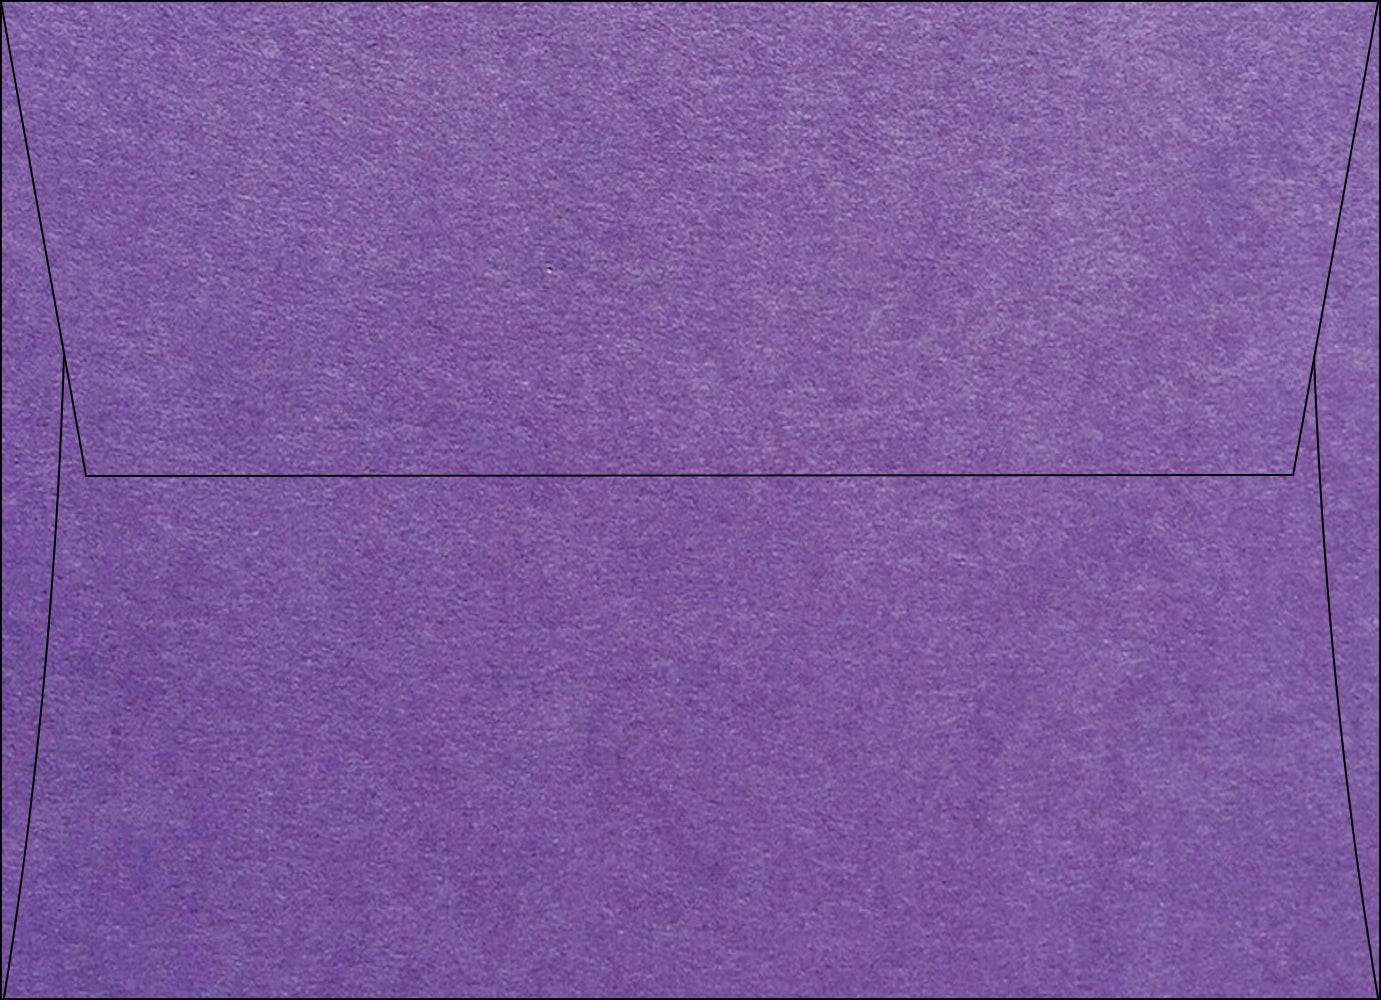 Grape Jelly Cardstock - Purple Cover Weight Paper - Pop-Tone – French Paper